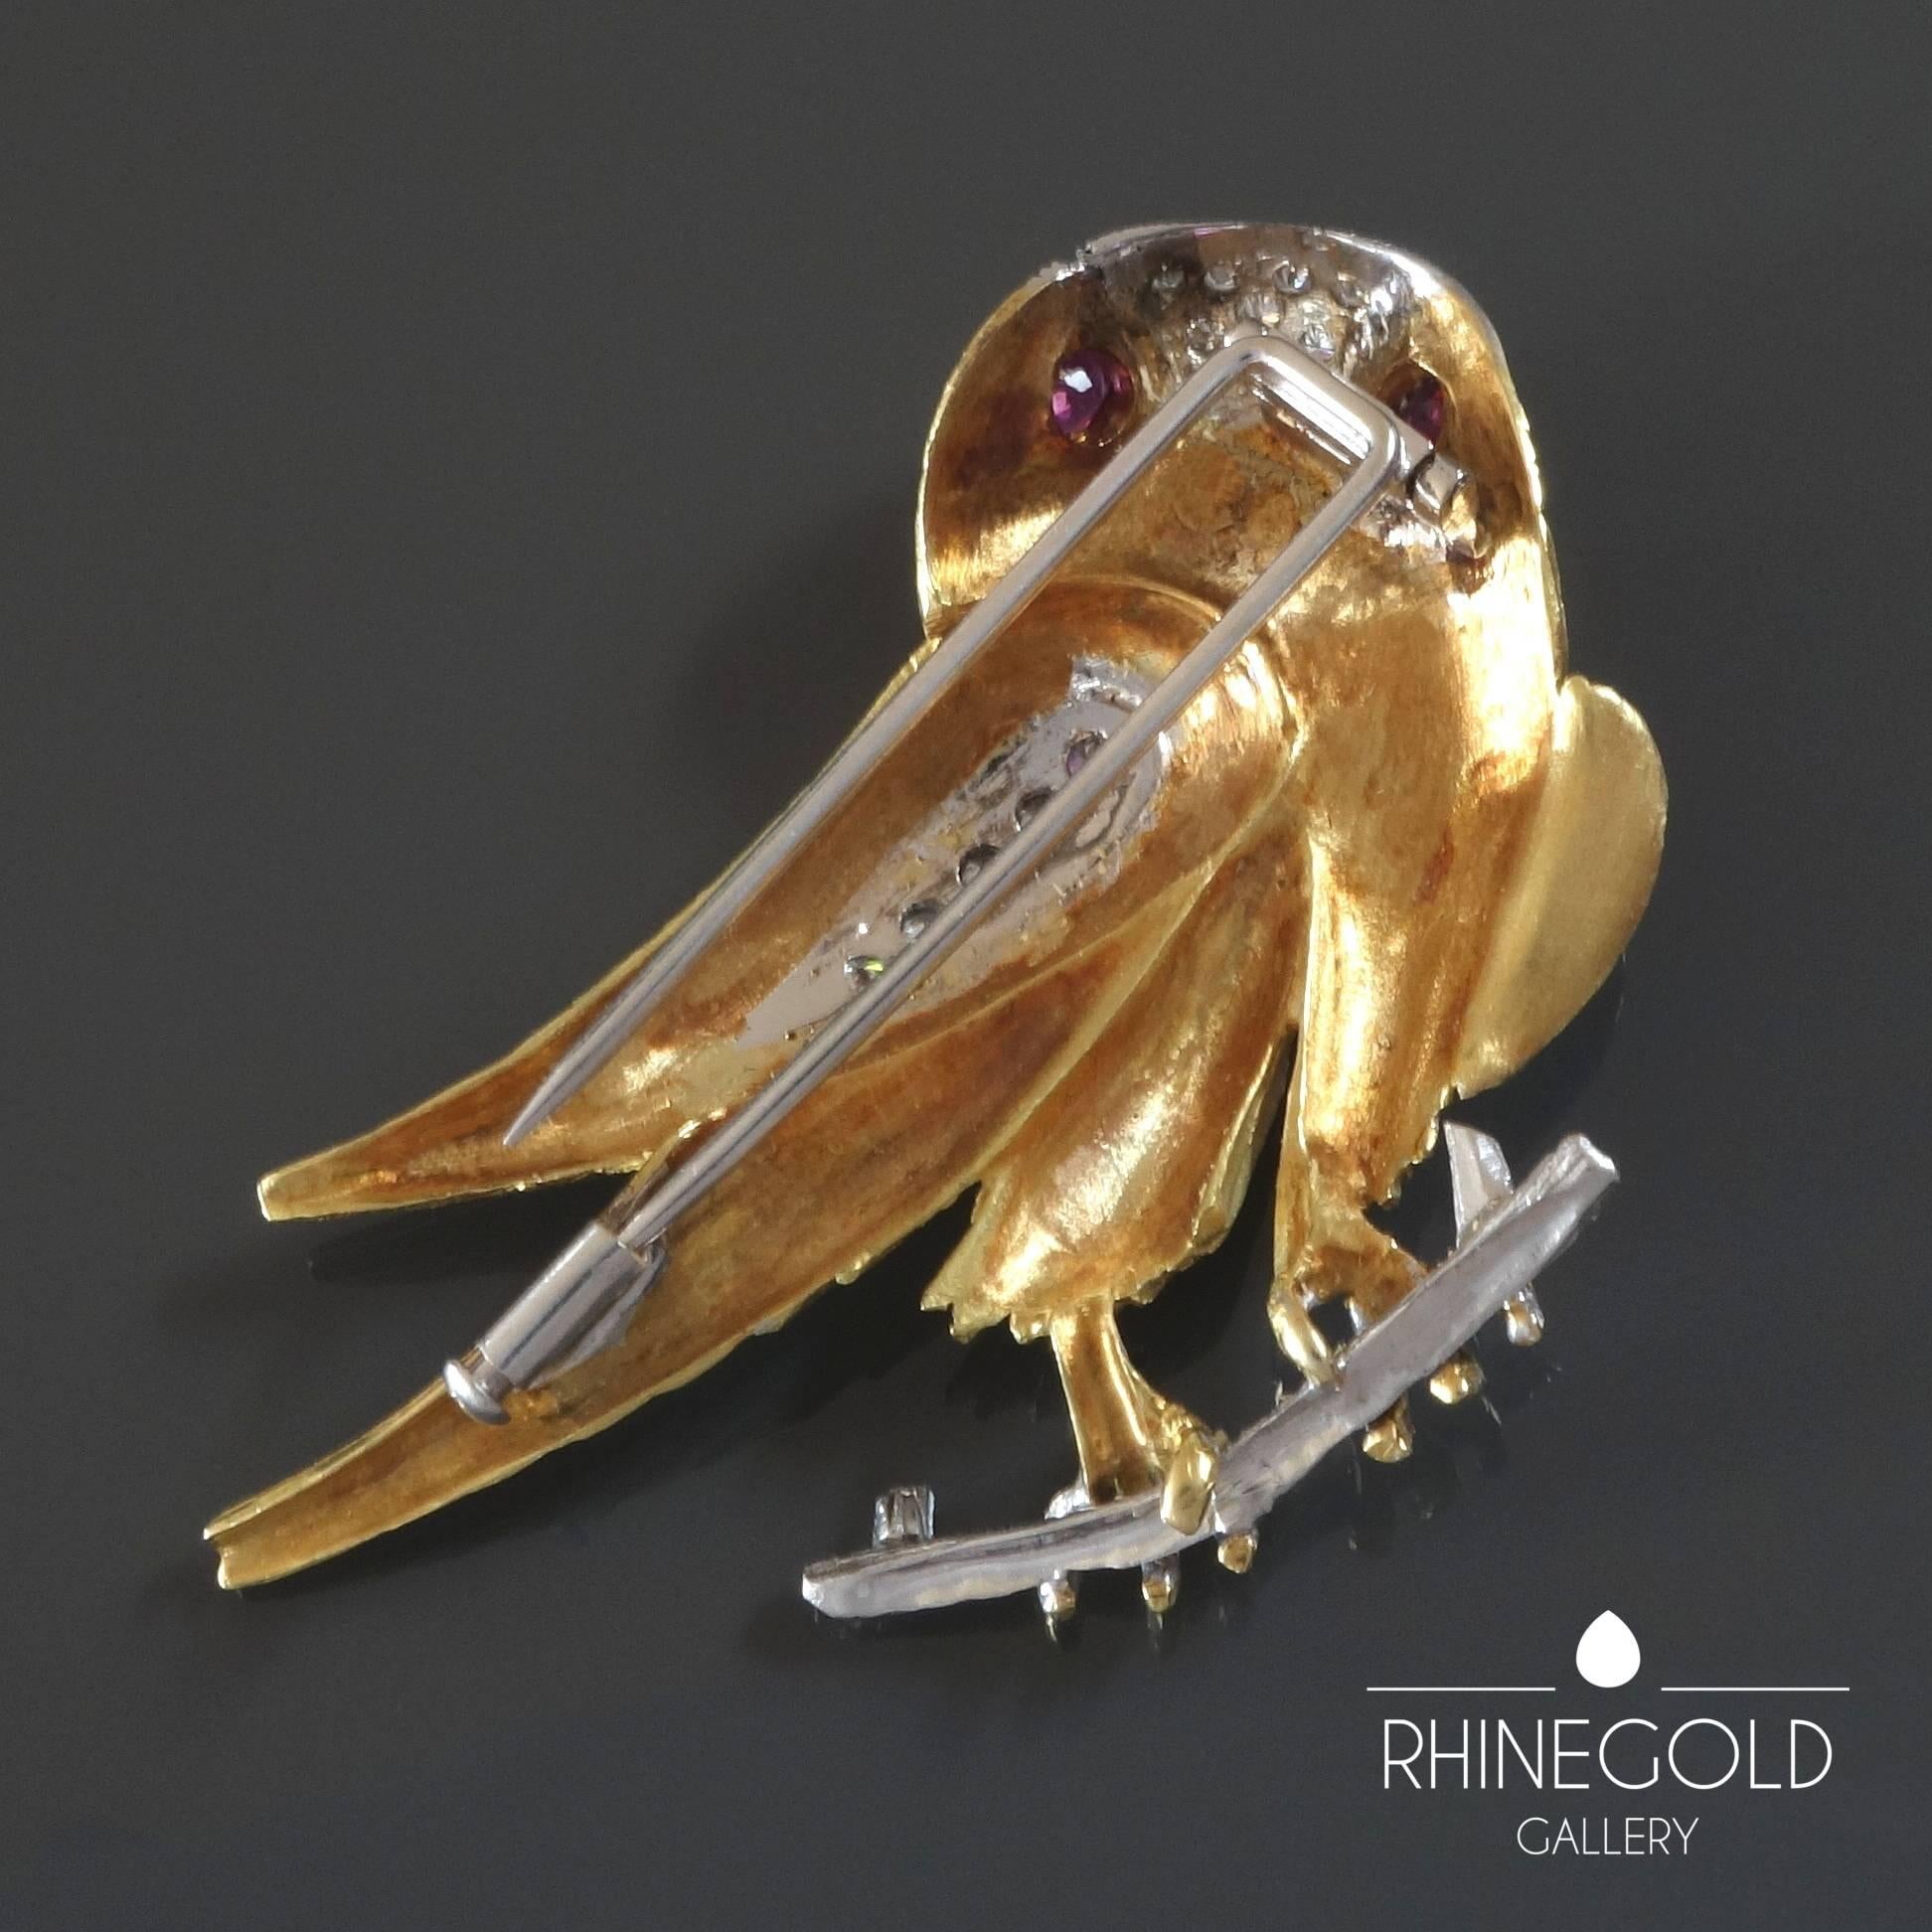 1970s Diamond Ruby Gold Falcon Bird Brooch
18k yellow and white gold, 2 facetted rubies (approx. 0.5 ct. in total), 13 brilliant cut diamonds (top wesselton, vvs, approx. 0.5ct. in total)
Size 4.8 cm by 5.6 cm (approx. 1 7/8” by 2 3/16”)
Weight